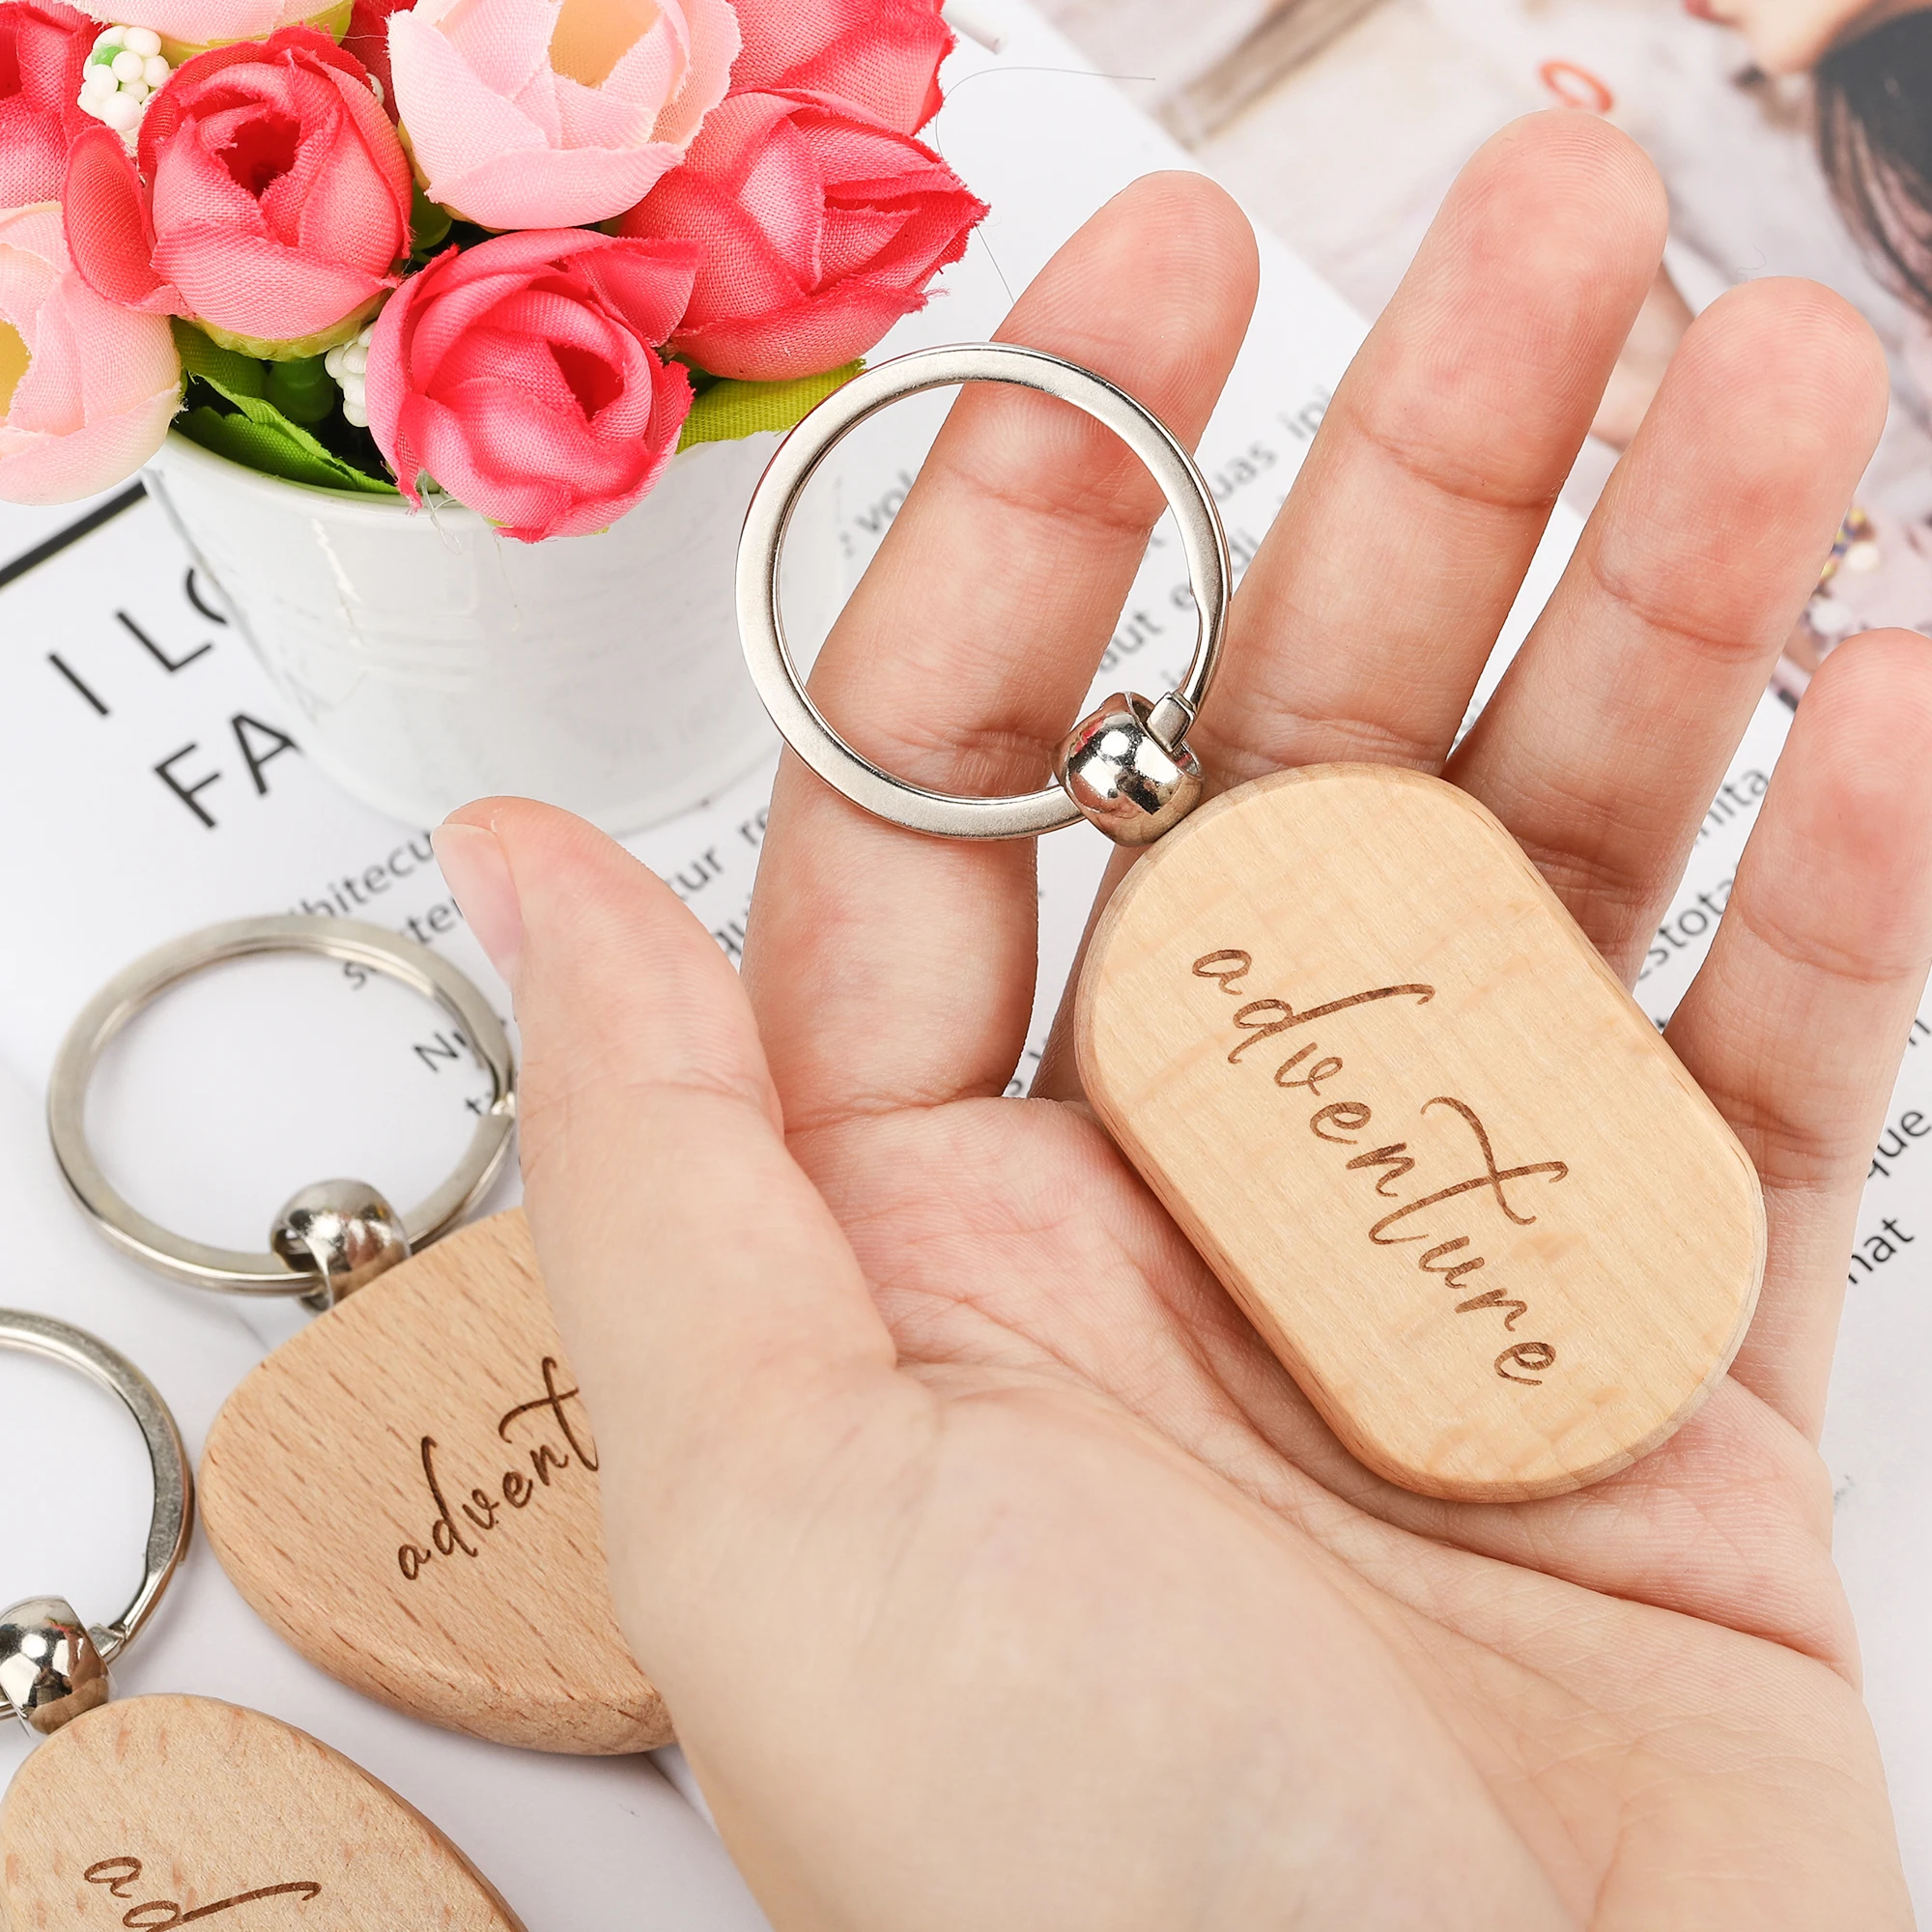 Wholesale 100Pcs Blank Tag ID Name Rectangular Wooden Keychain Engraved Diy  Wood Chips Simple Key Tags Handmade Accessories Key - AliExpress